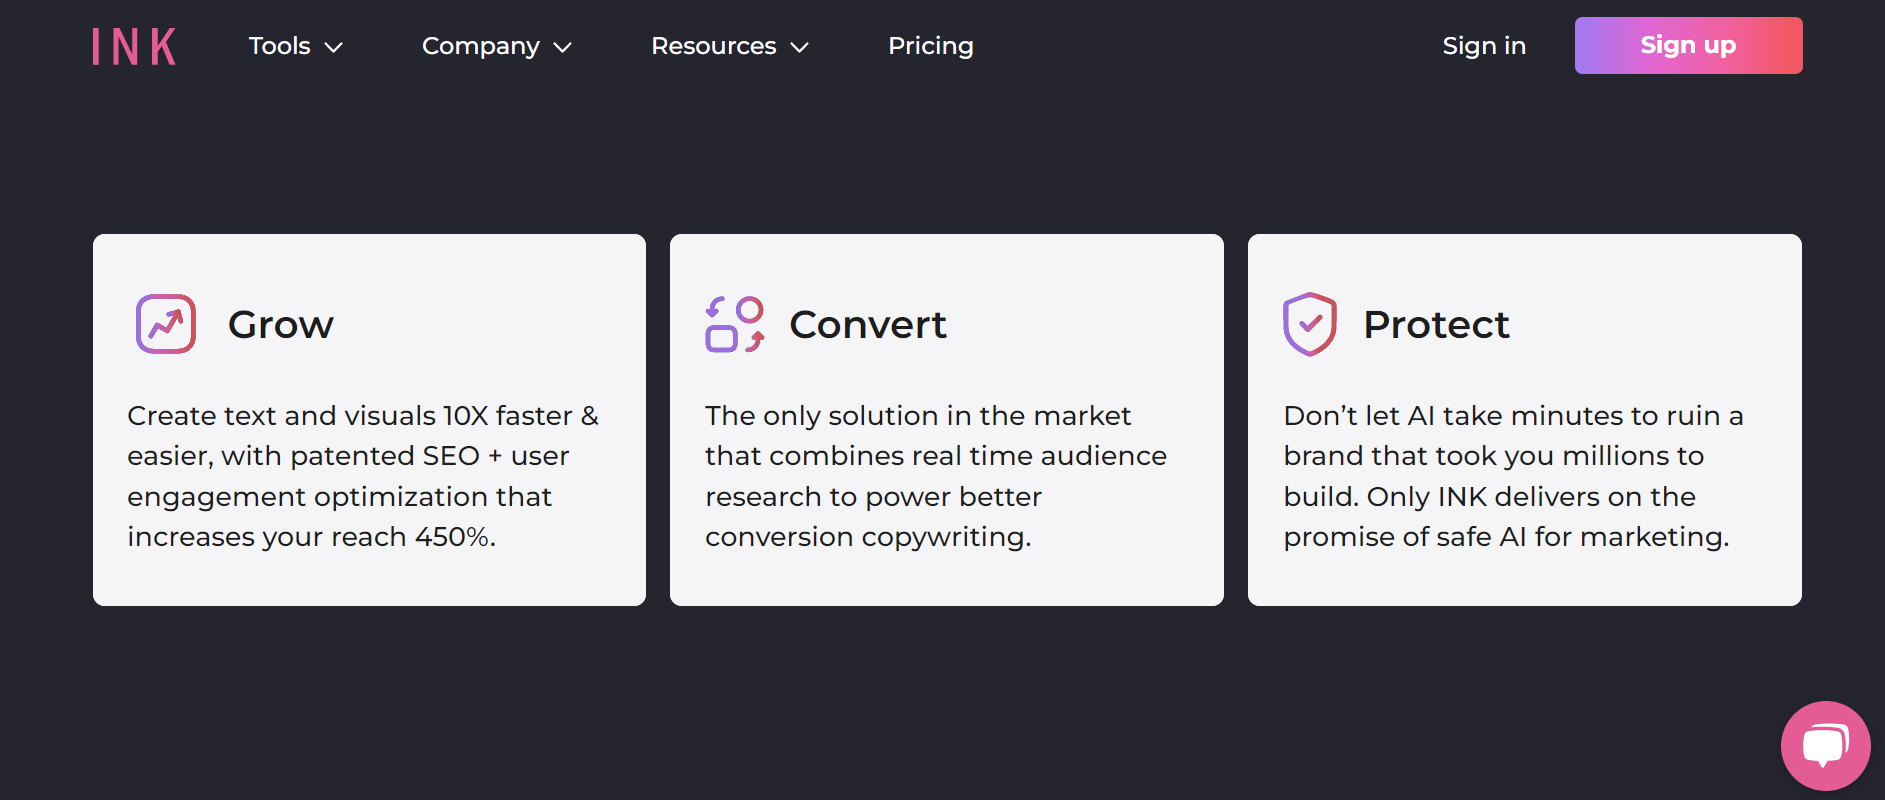 INK for All Landing Page - "Grow, Convert, Protect"